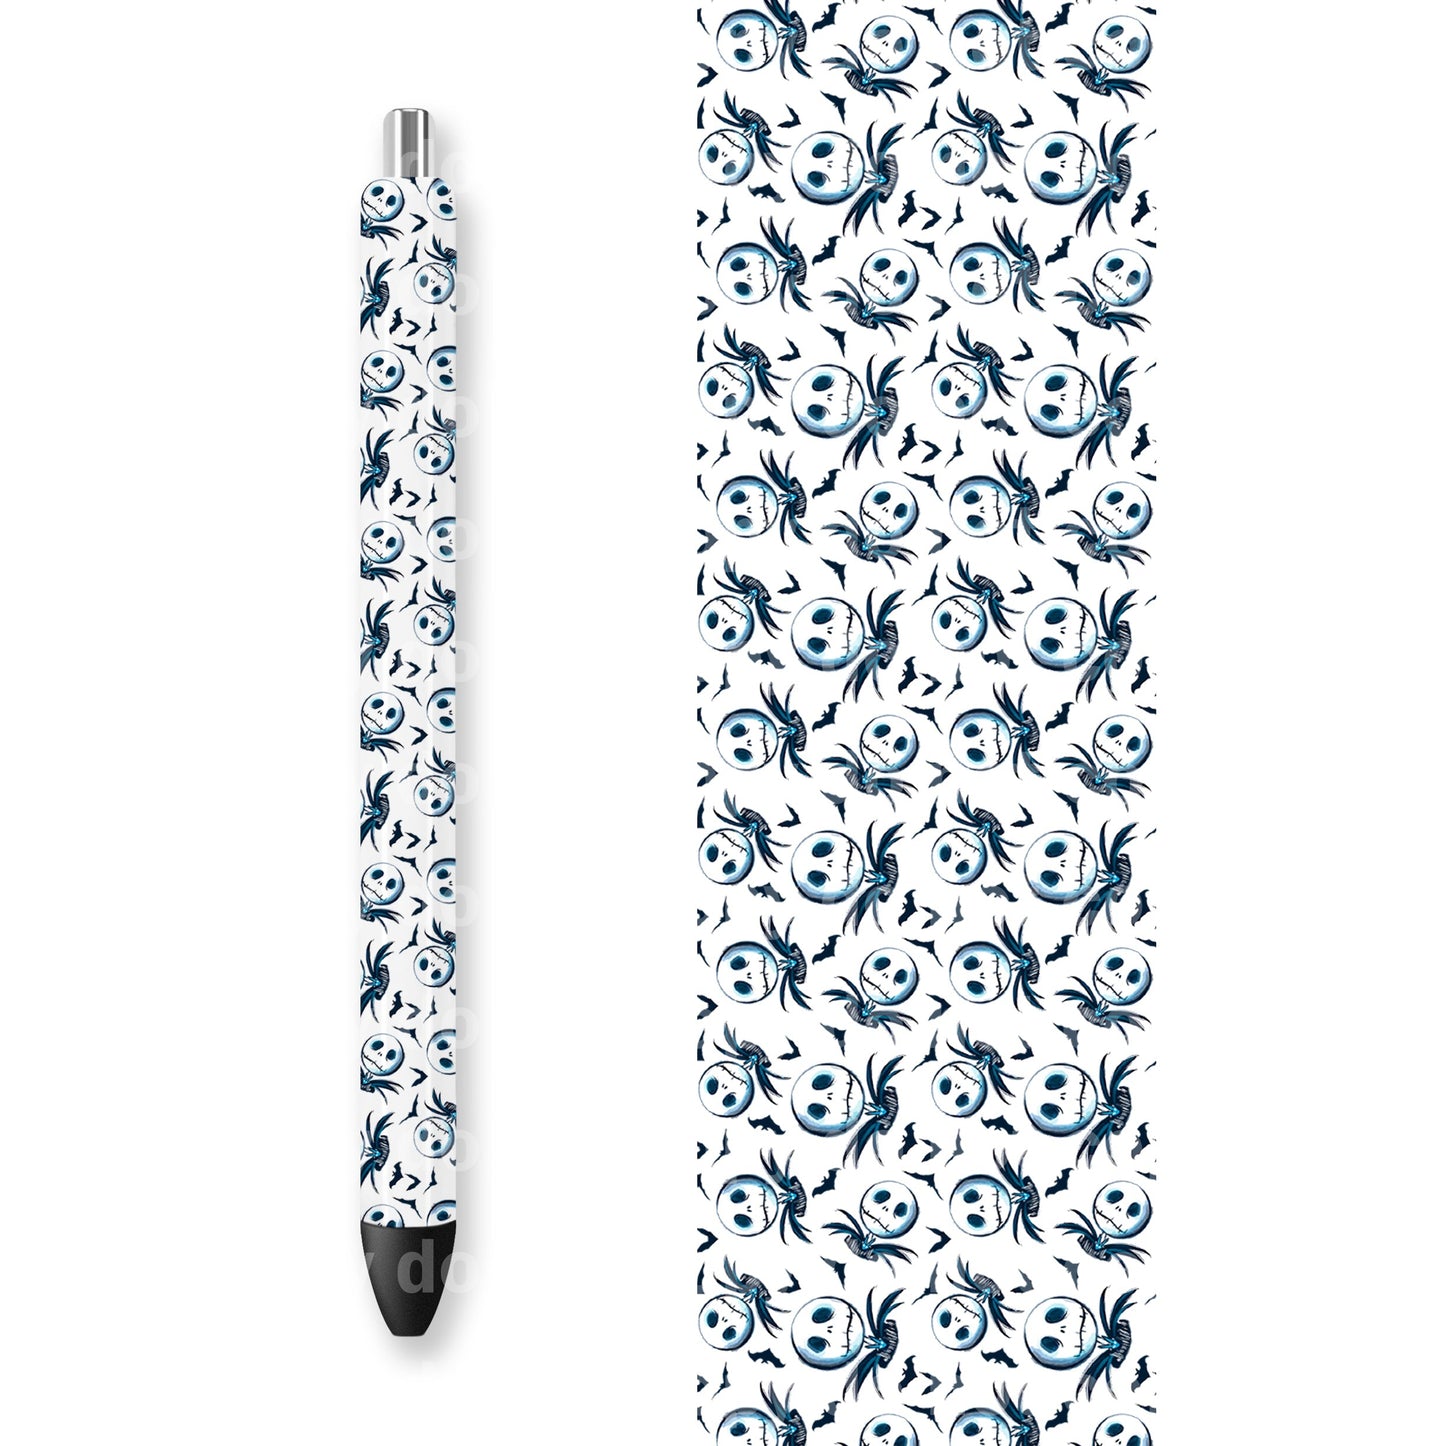 Jack Head And Bats 16oz Cup Wrap and Pen Wrap